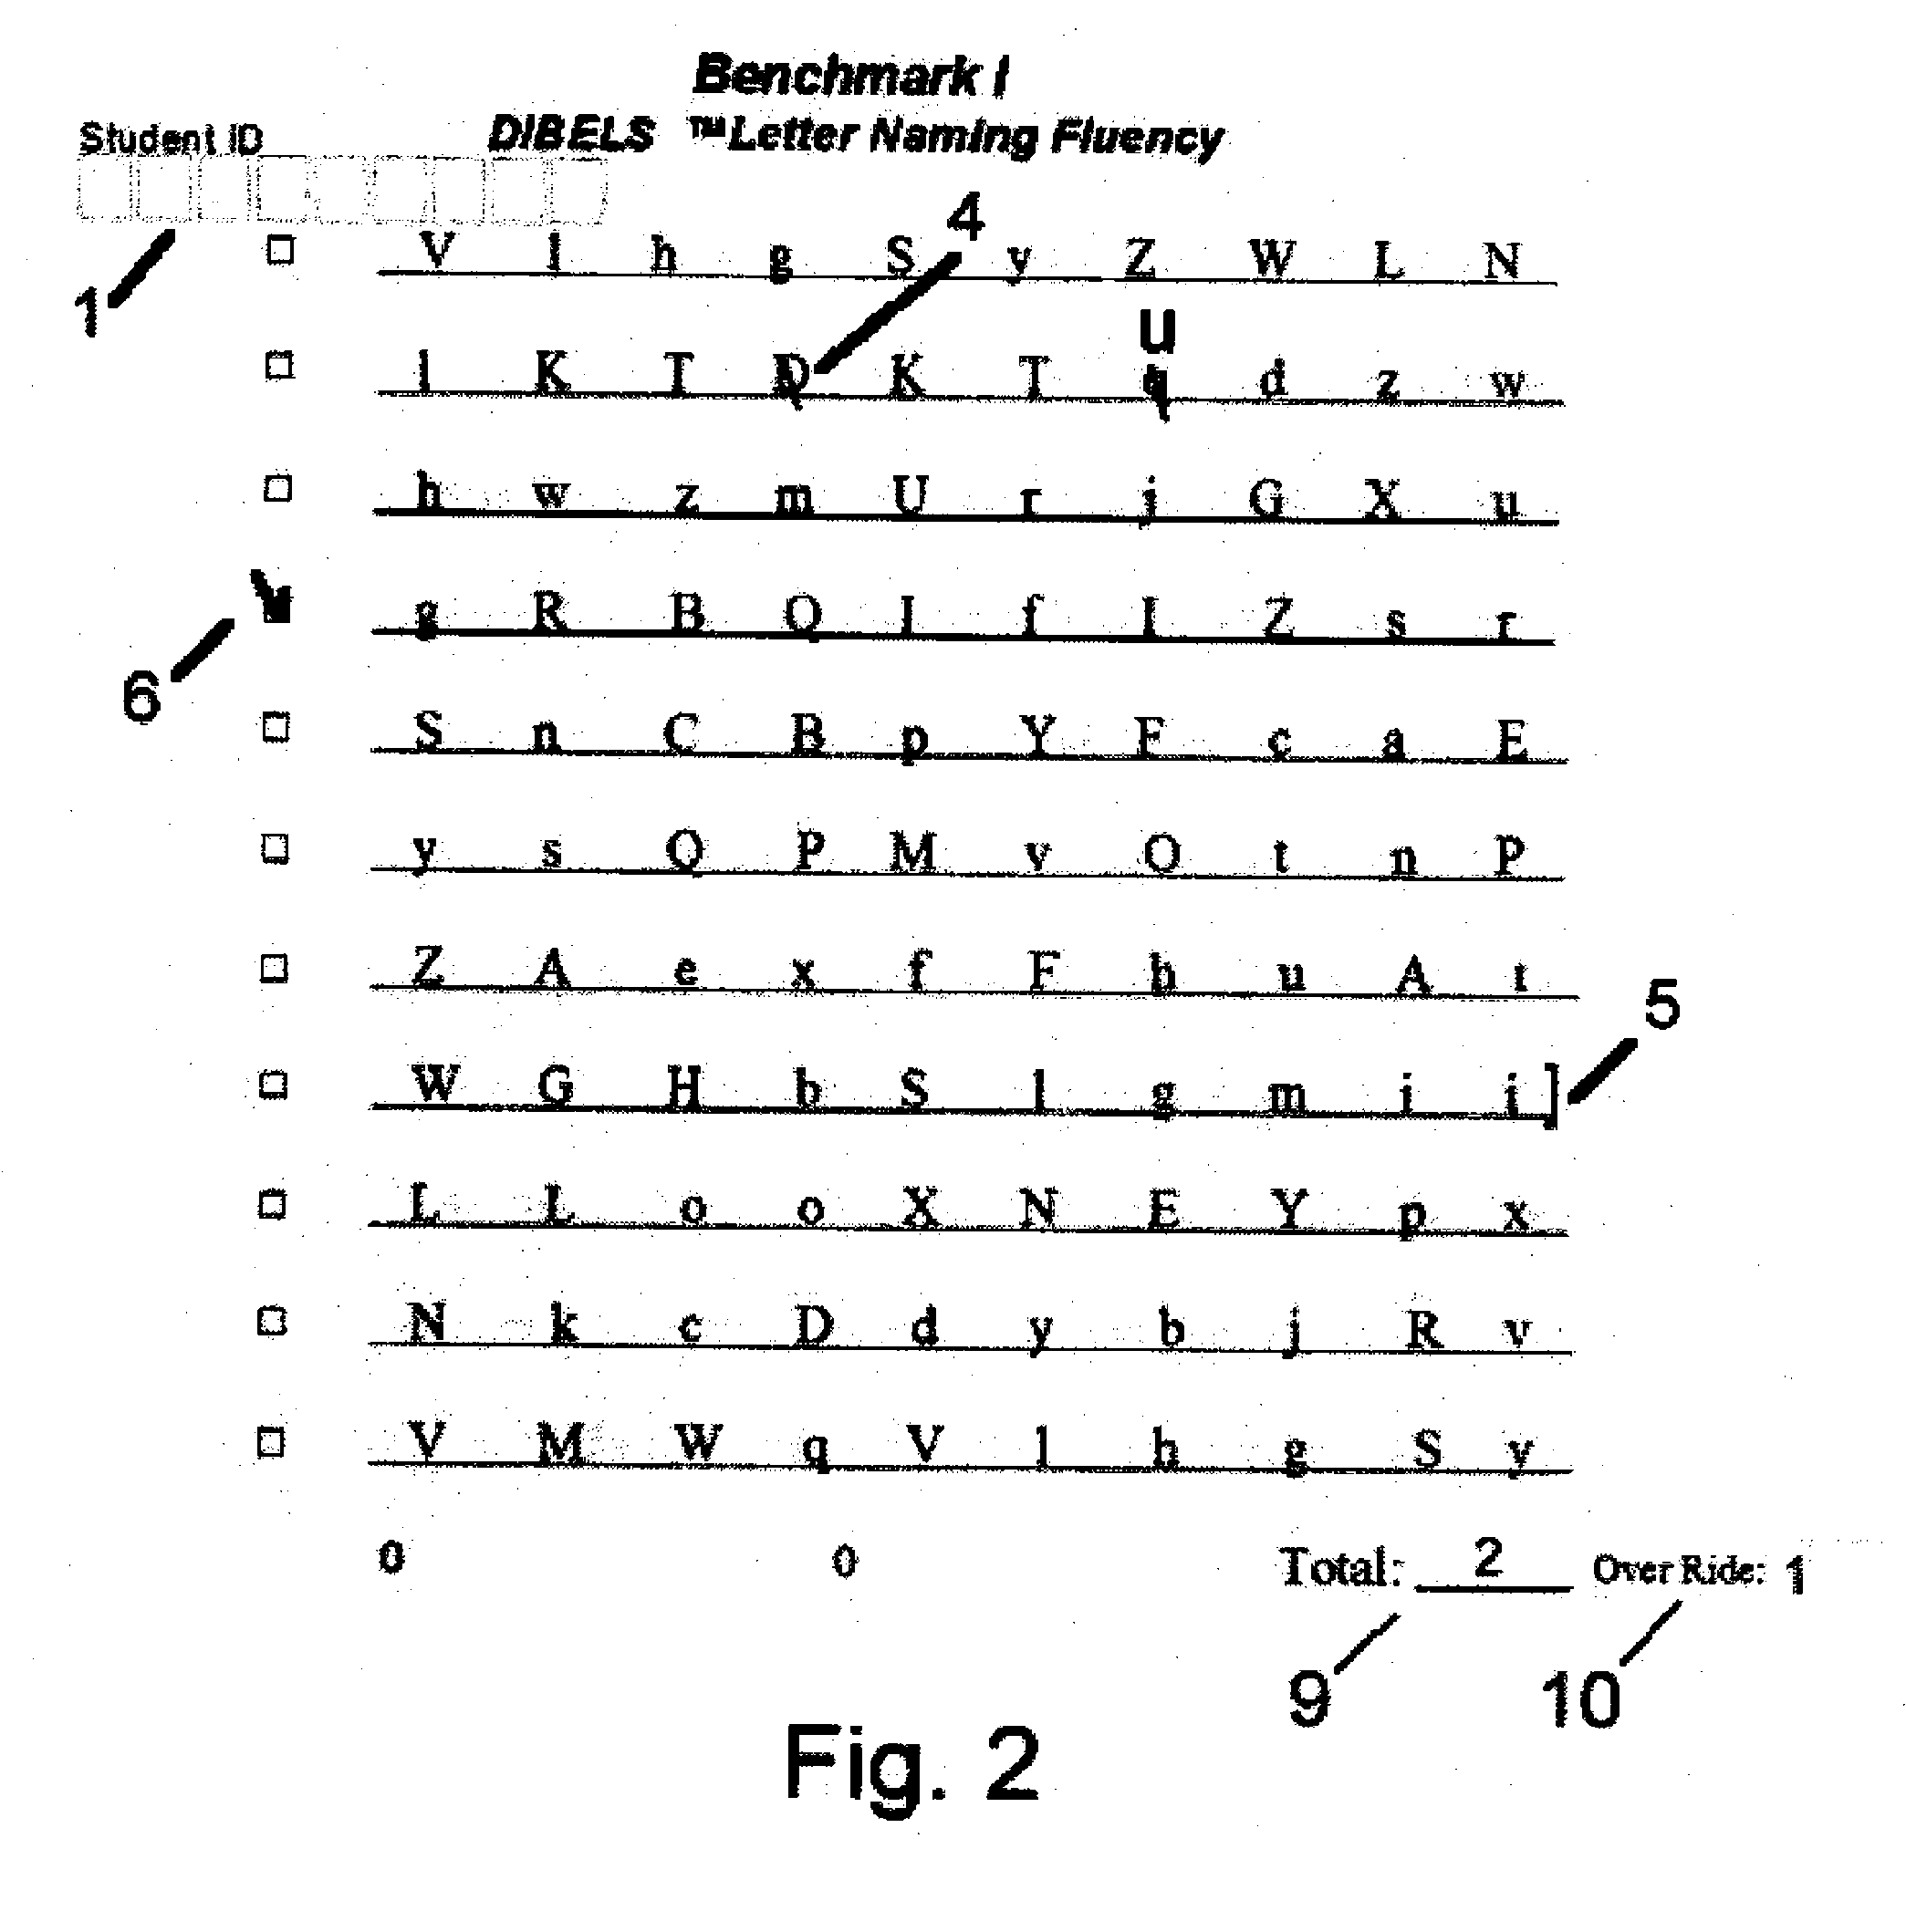 Method for Automated Examination Testing and Scoring